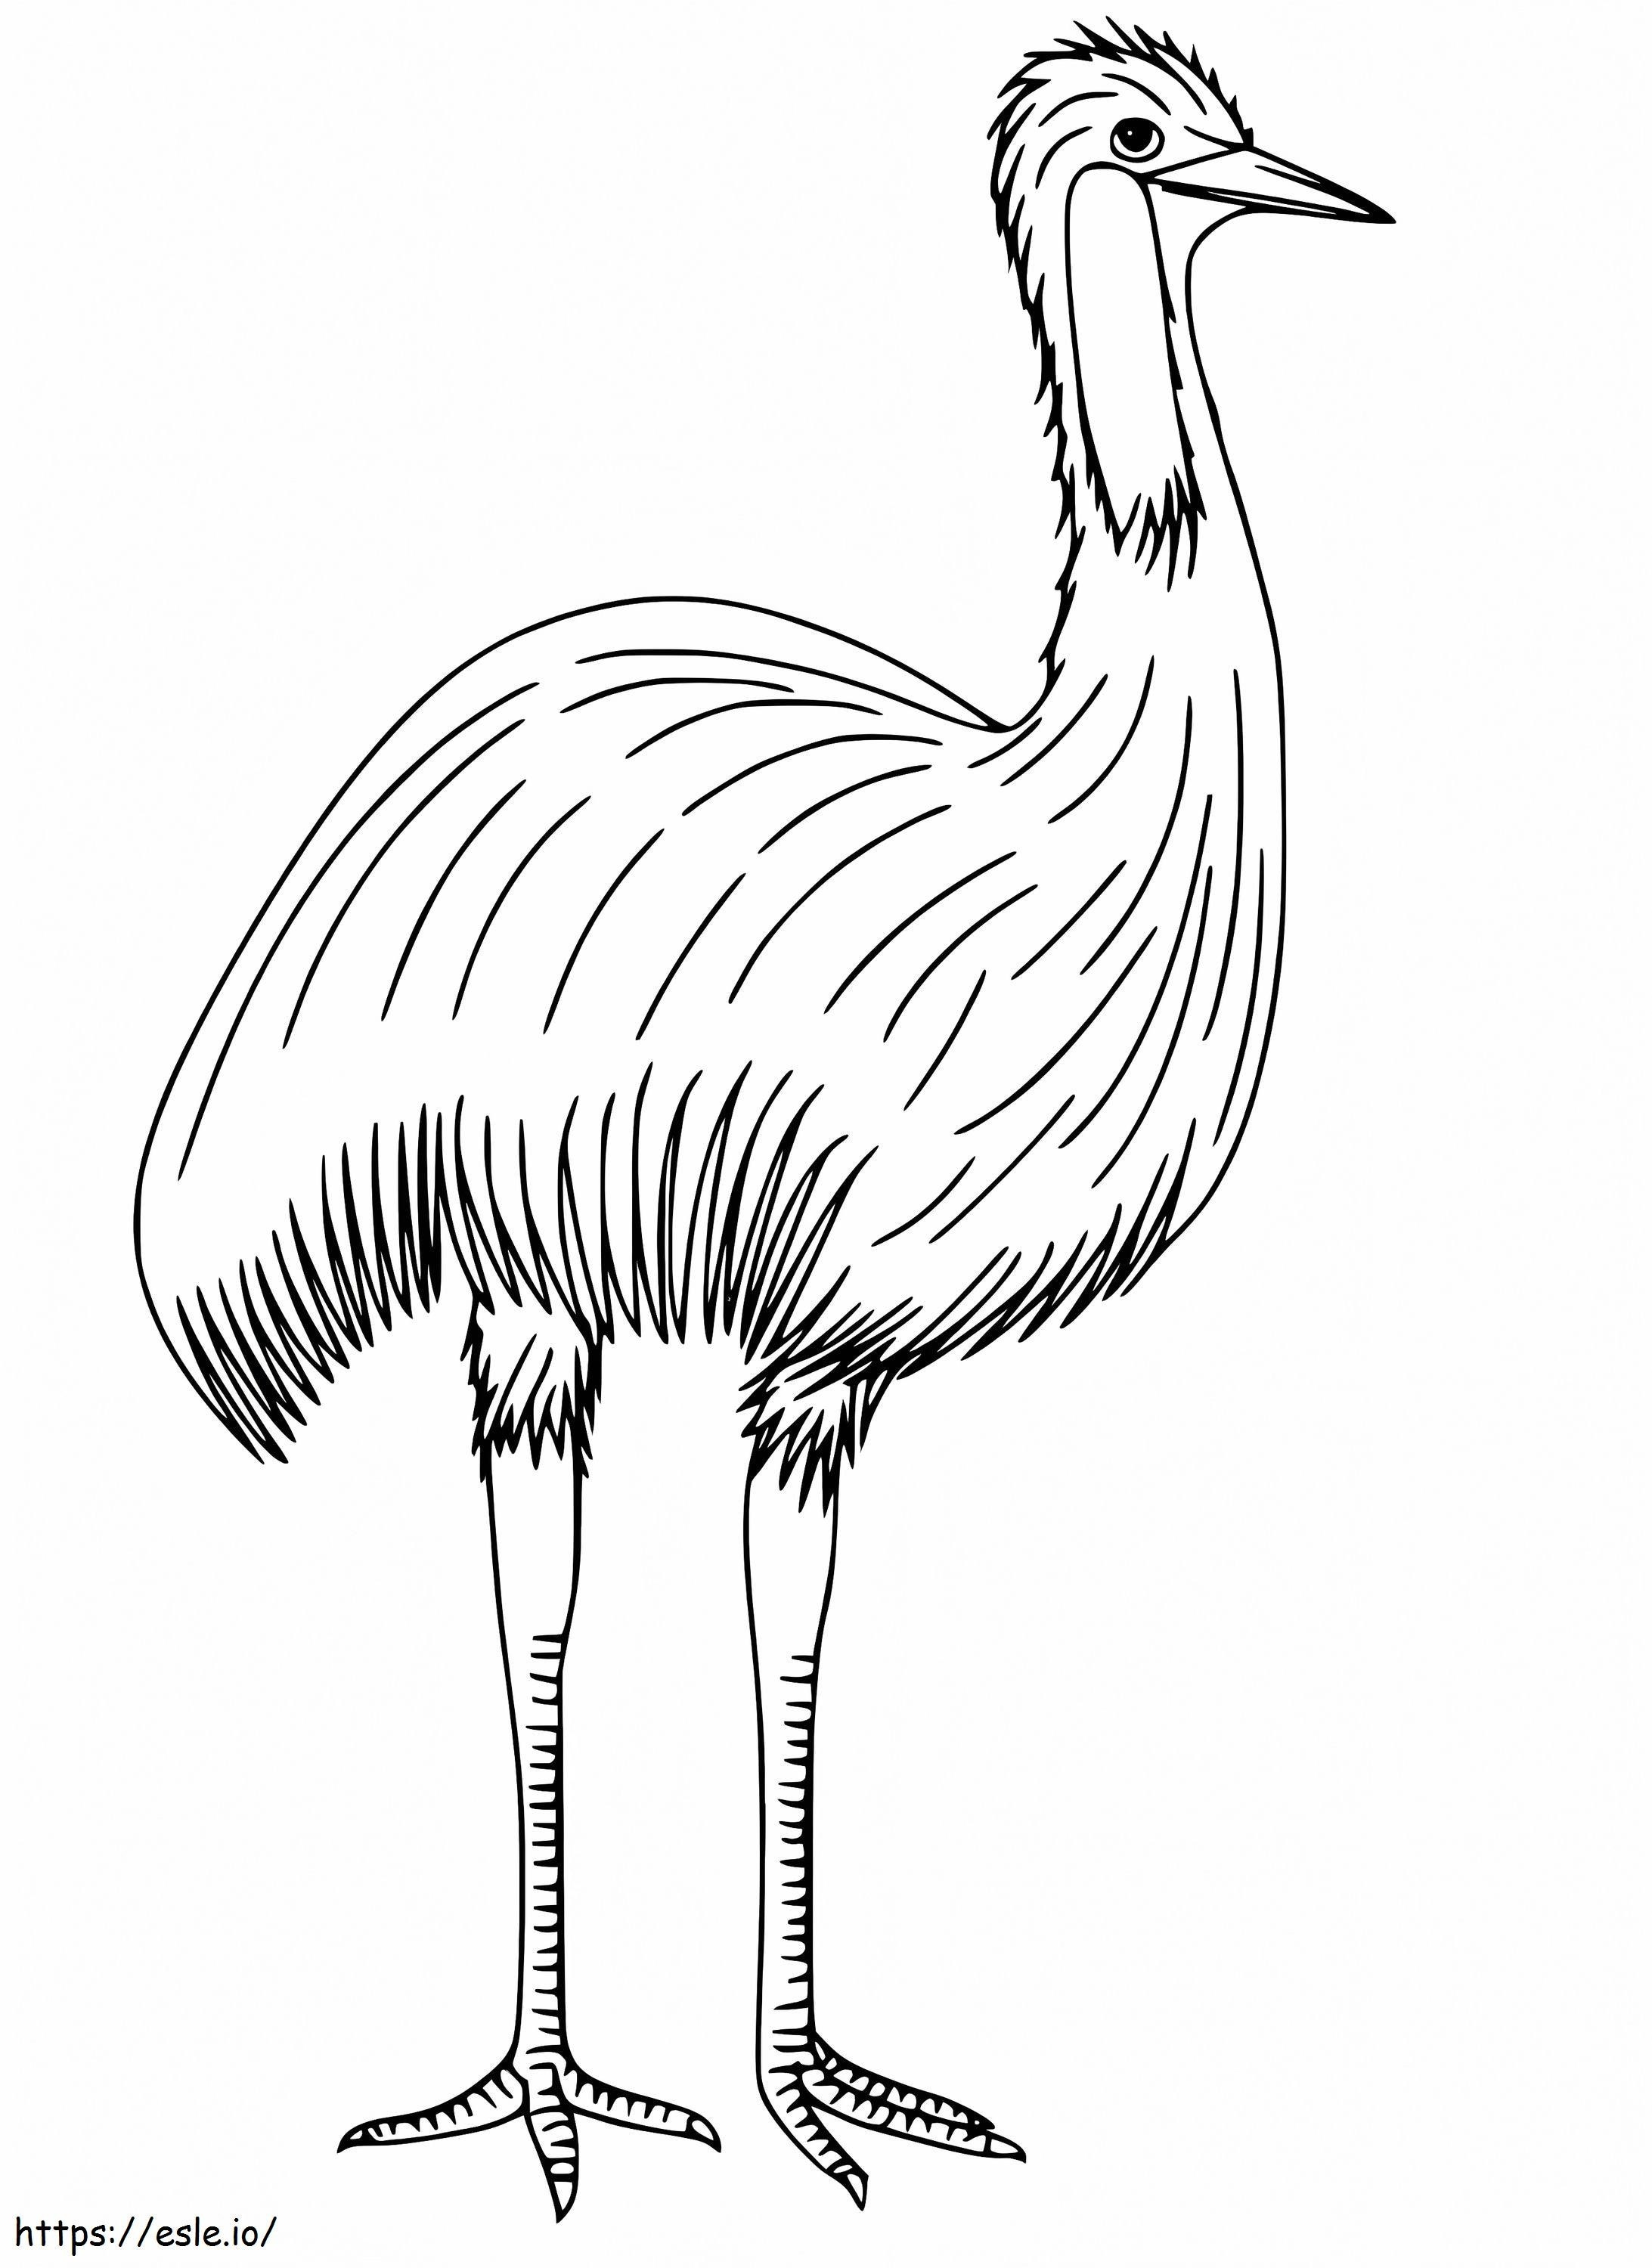 Emu 4 coloring page